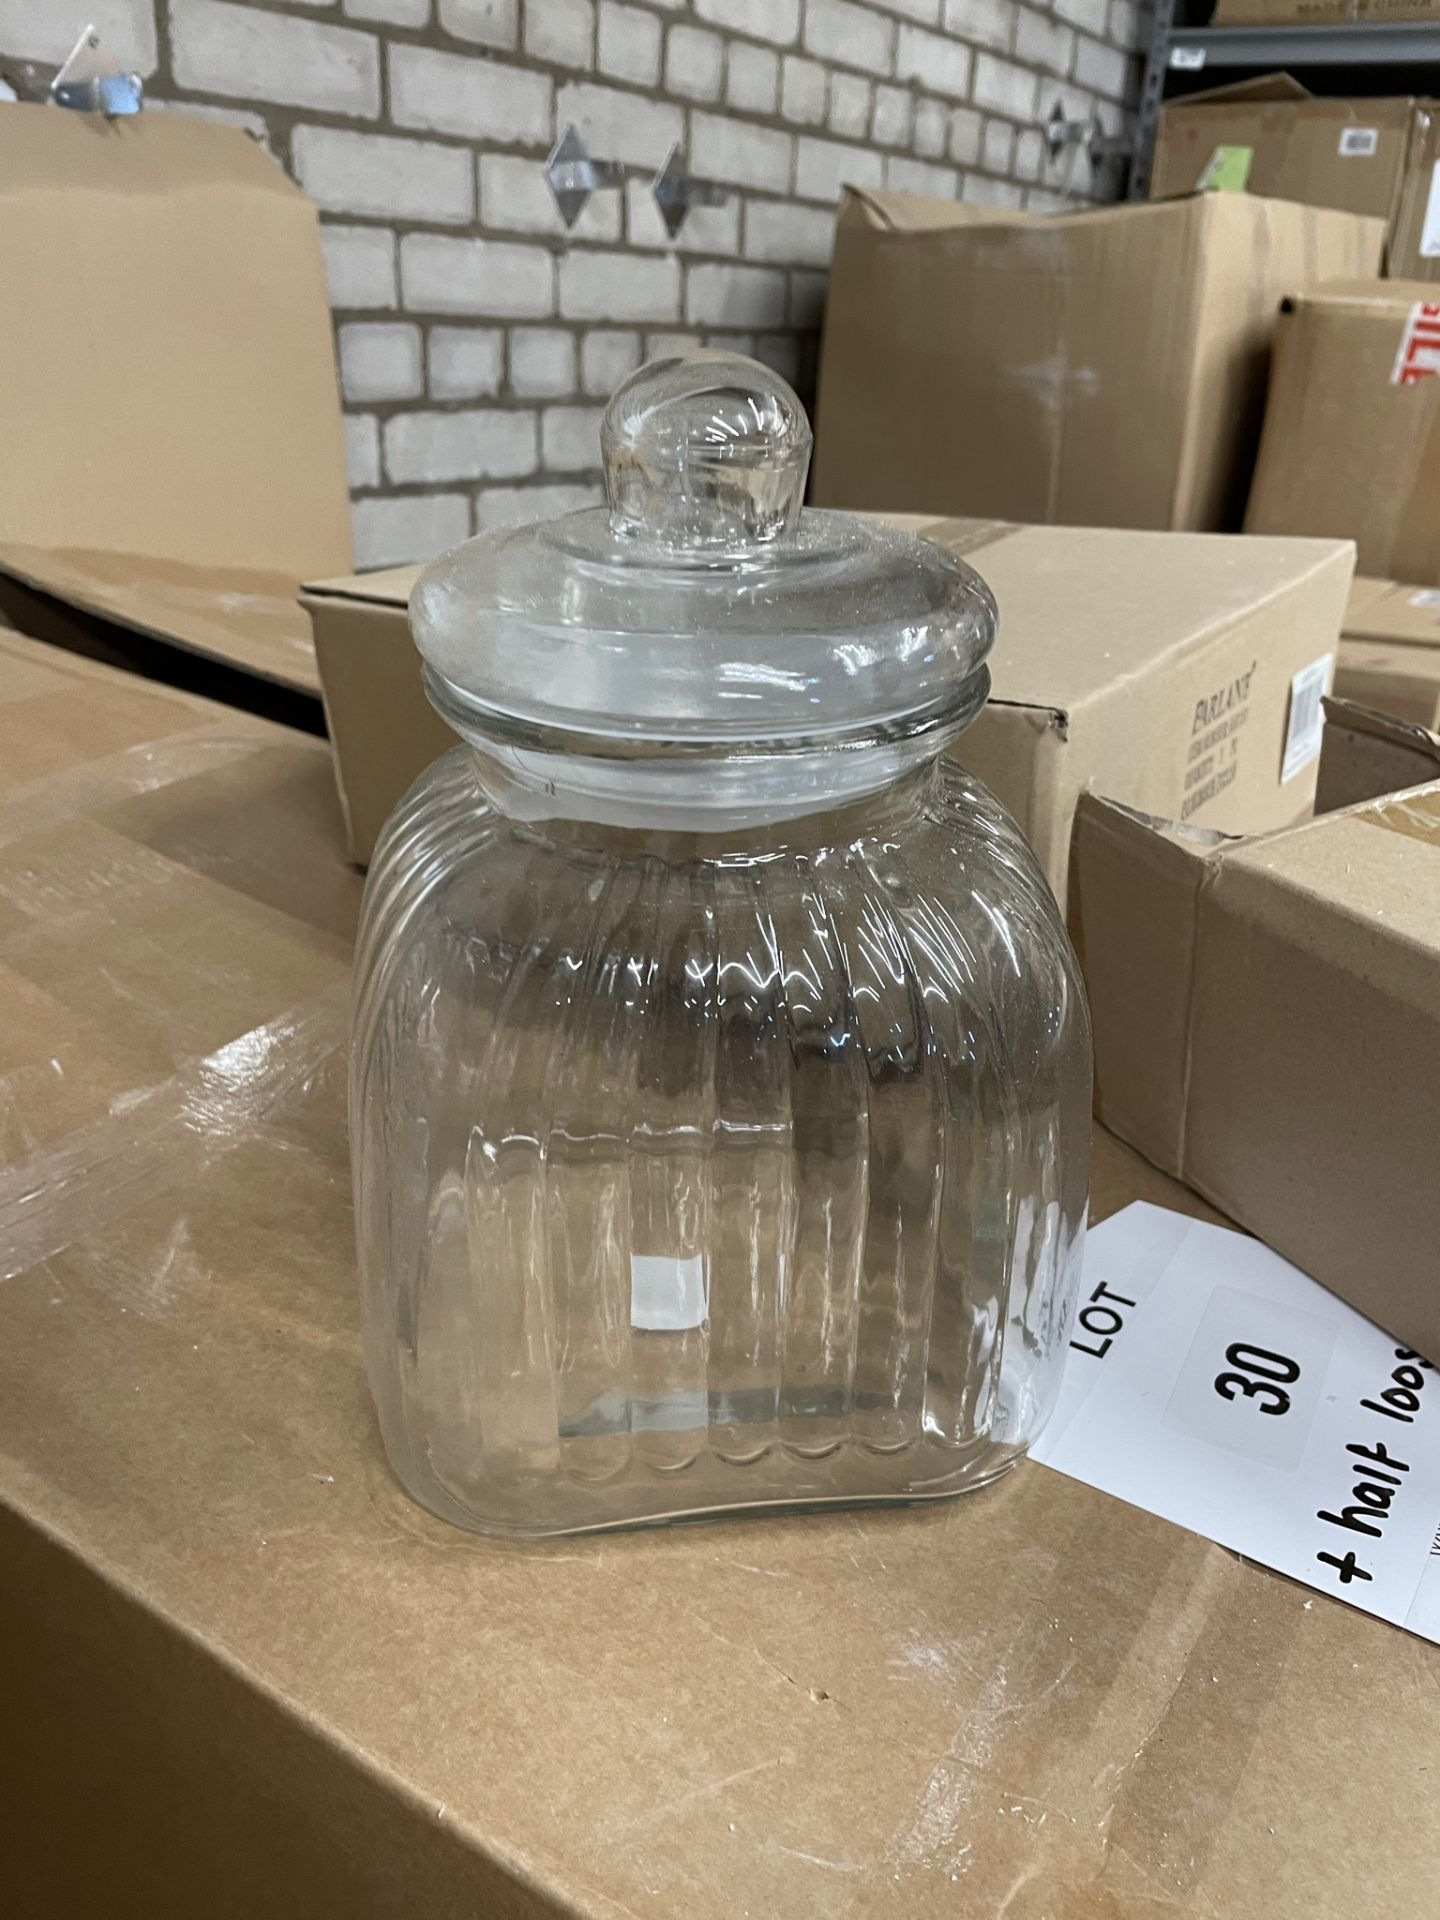 Large Quantity of Various Spare/Loose Glassware Items - Examples can be seen in pictures - Image 11 of 18